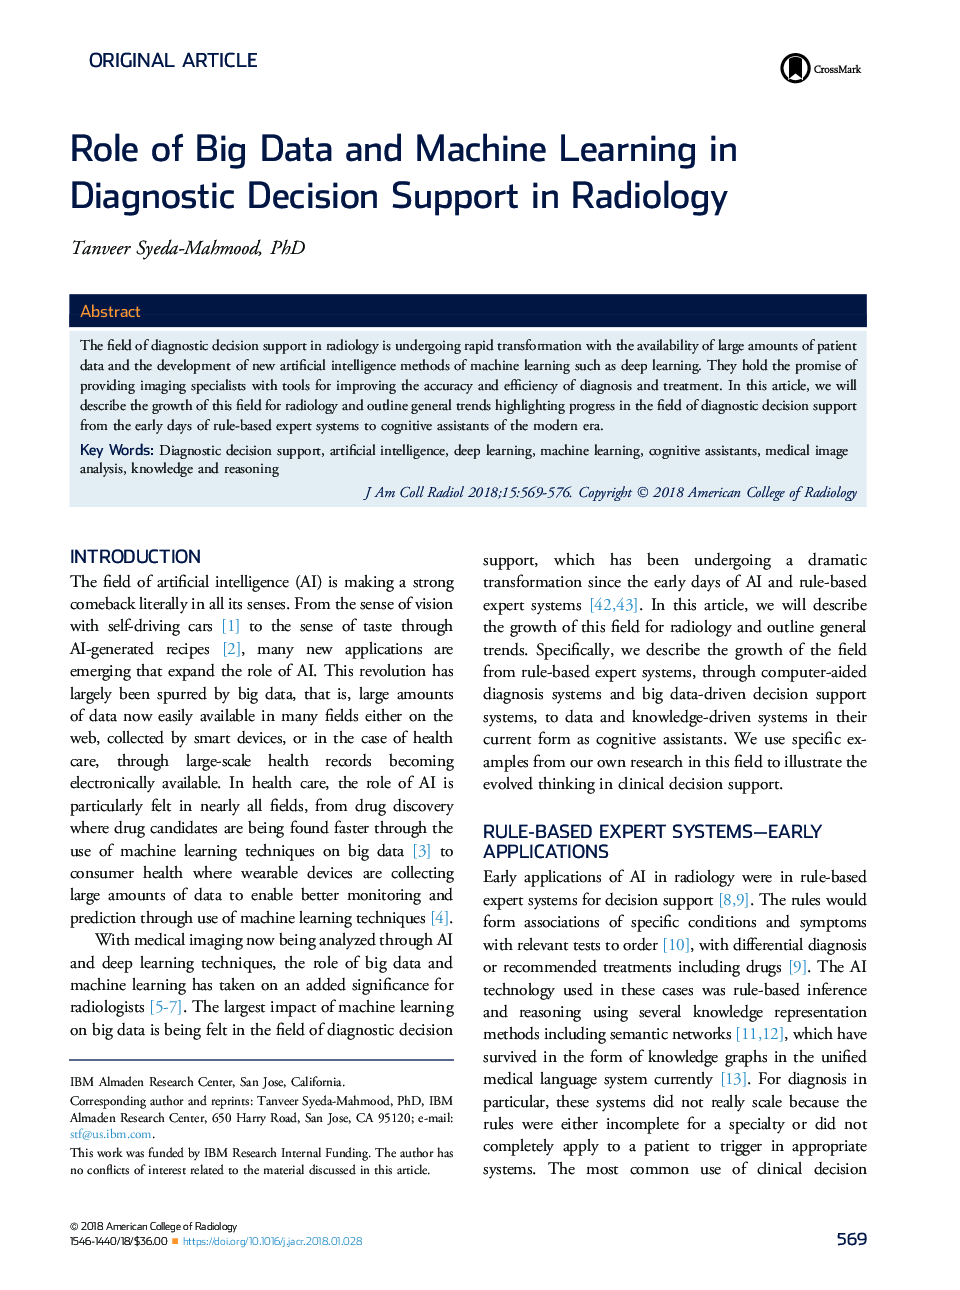 Role of Big Data and Machine Learning in Diagnostic Decision Support in Radiology